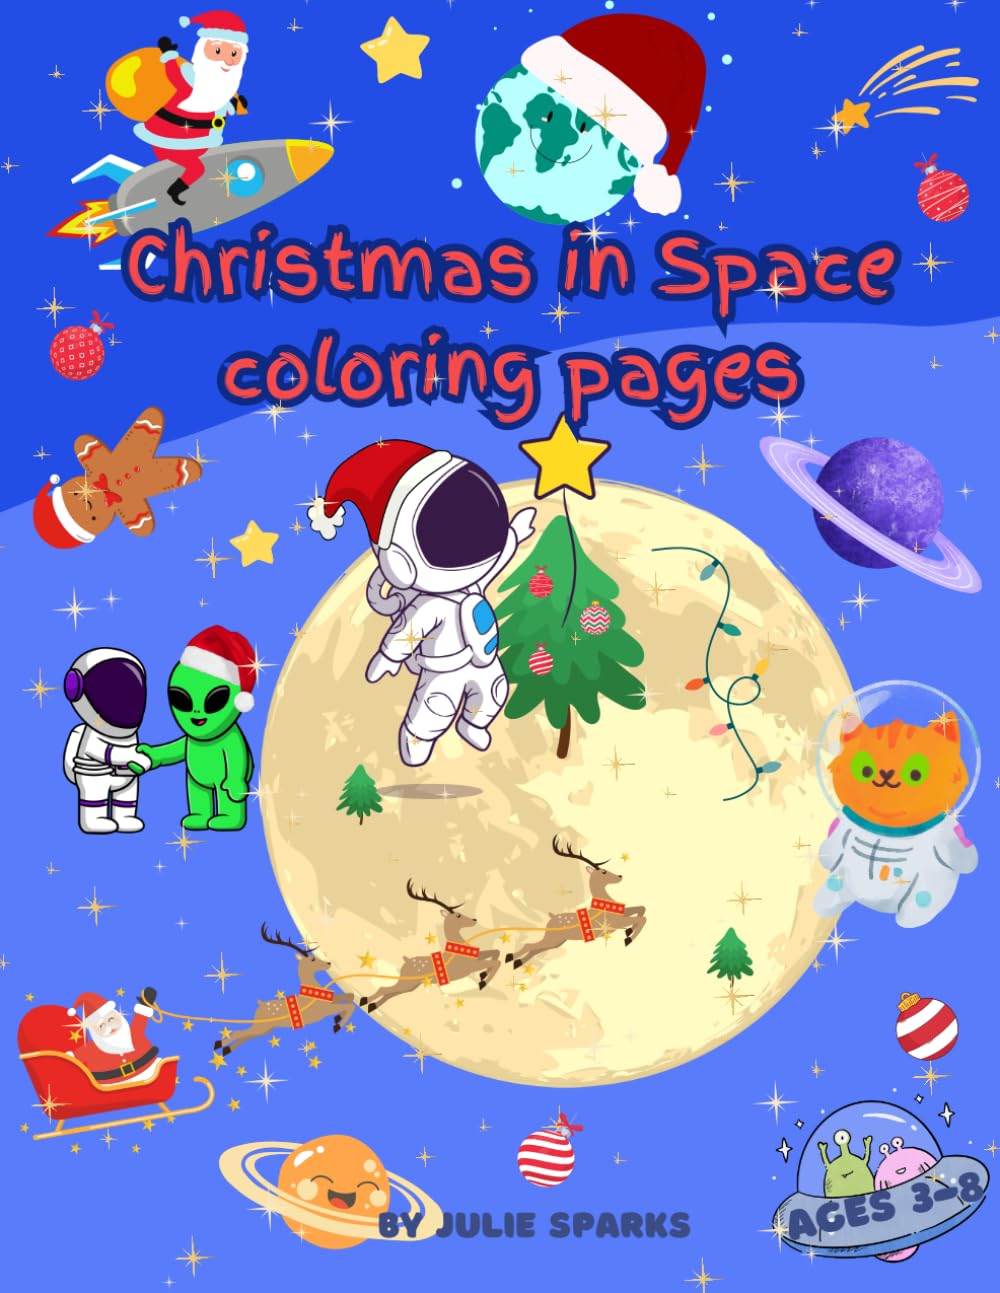 Christmas in Space, coloring pages, Christmas coloring pages: for age 3-8